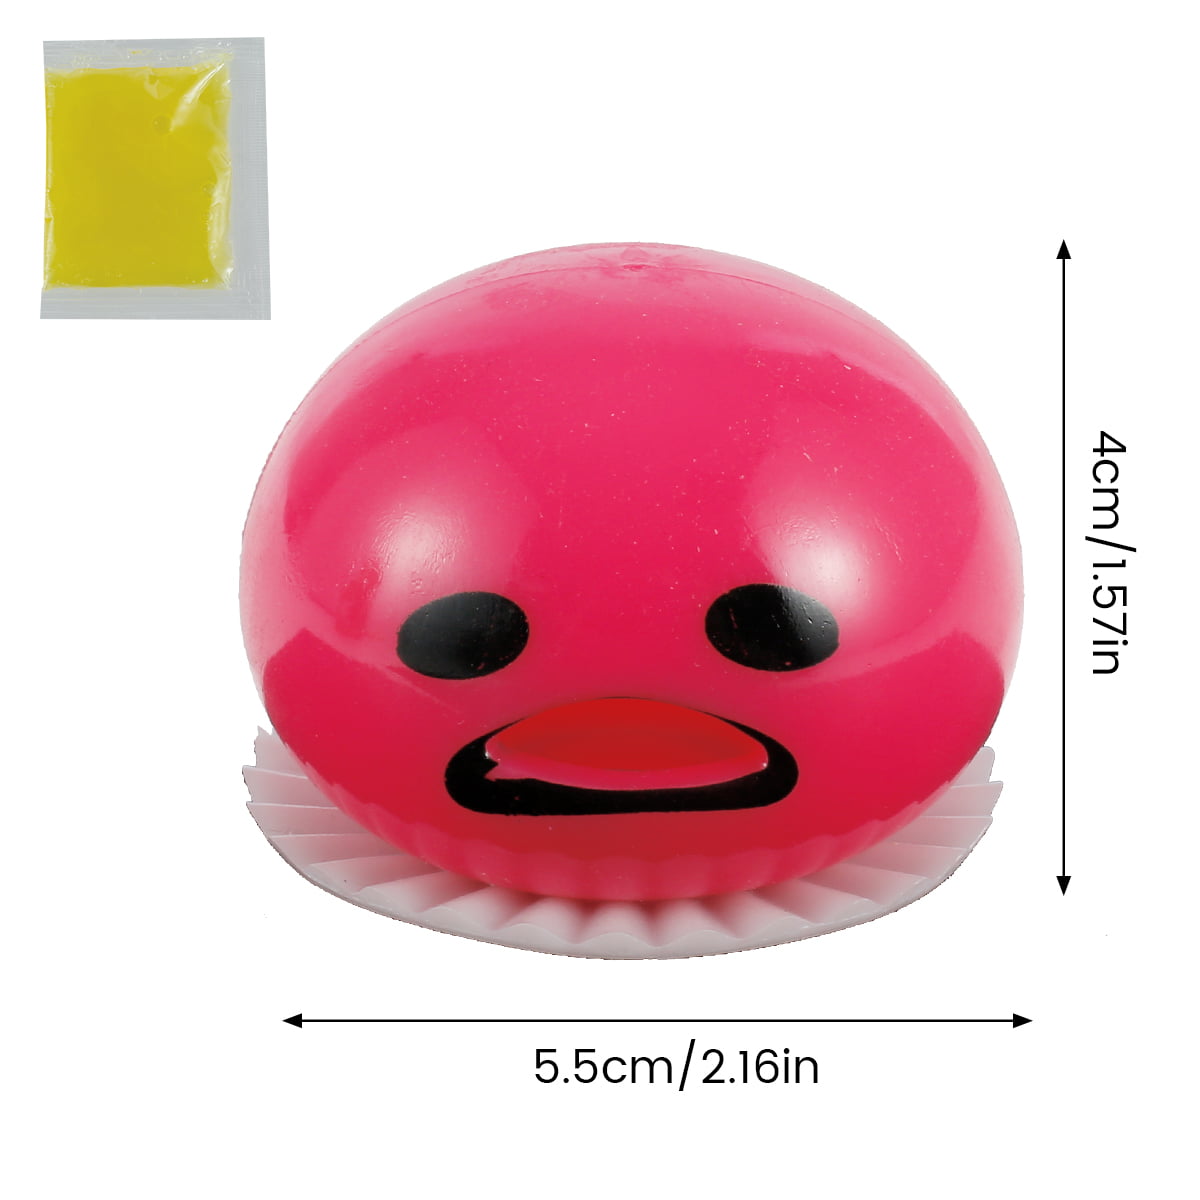 Vomiting Sucking Lazy Egg Yolk Vent Decompression Squeeze Toy Fidget Sensory Toy Novelty Cute Relief Toys Bubble Toy for Children Adults Teenagers Green Funny Sensory Fidget Toys 